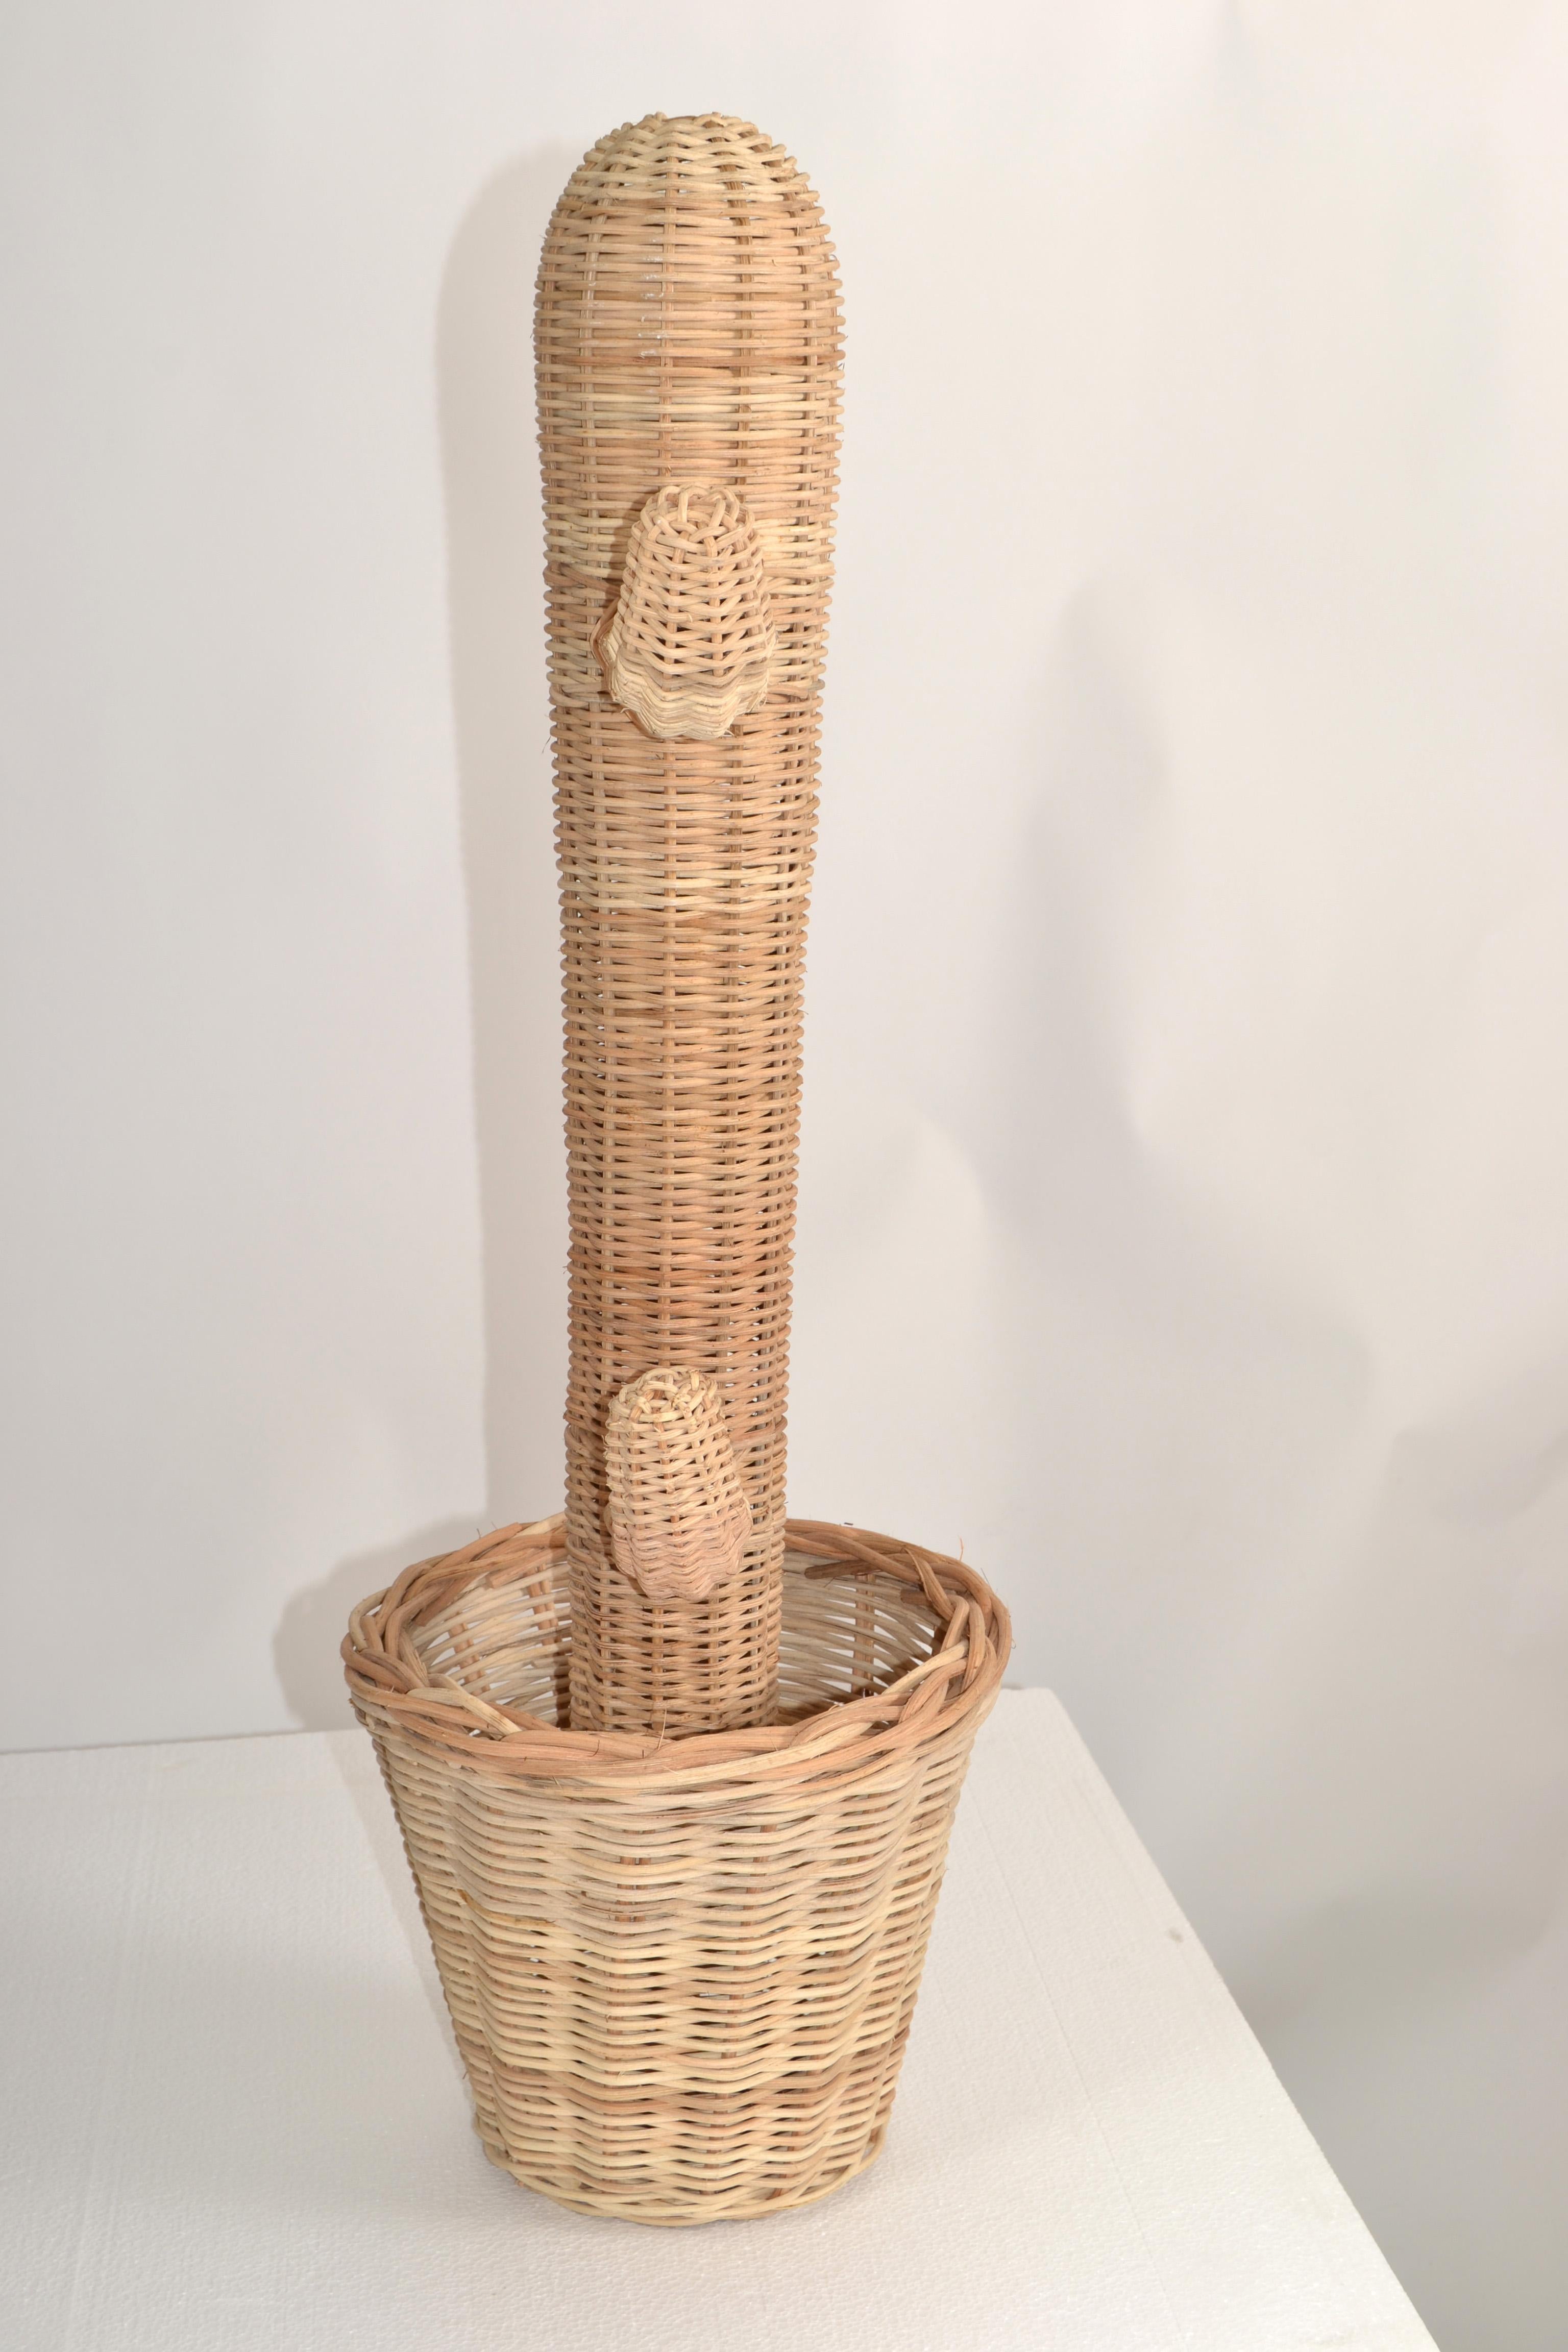 Hand-Woven Rattan Cactus Pot Sculpture 1970 Bohemian Mario Lopez Torres Style In Good Condition For Sale In Miami, FL